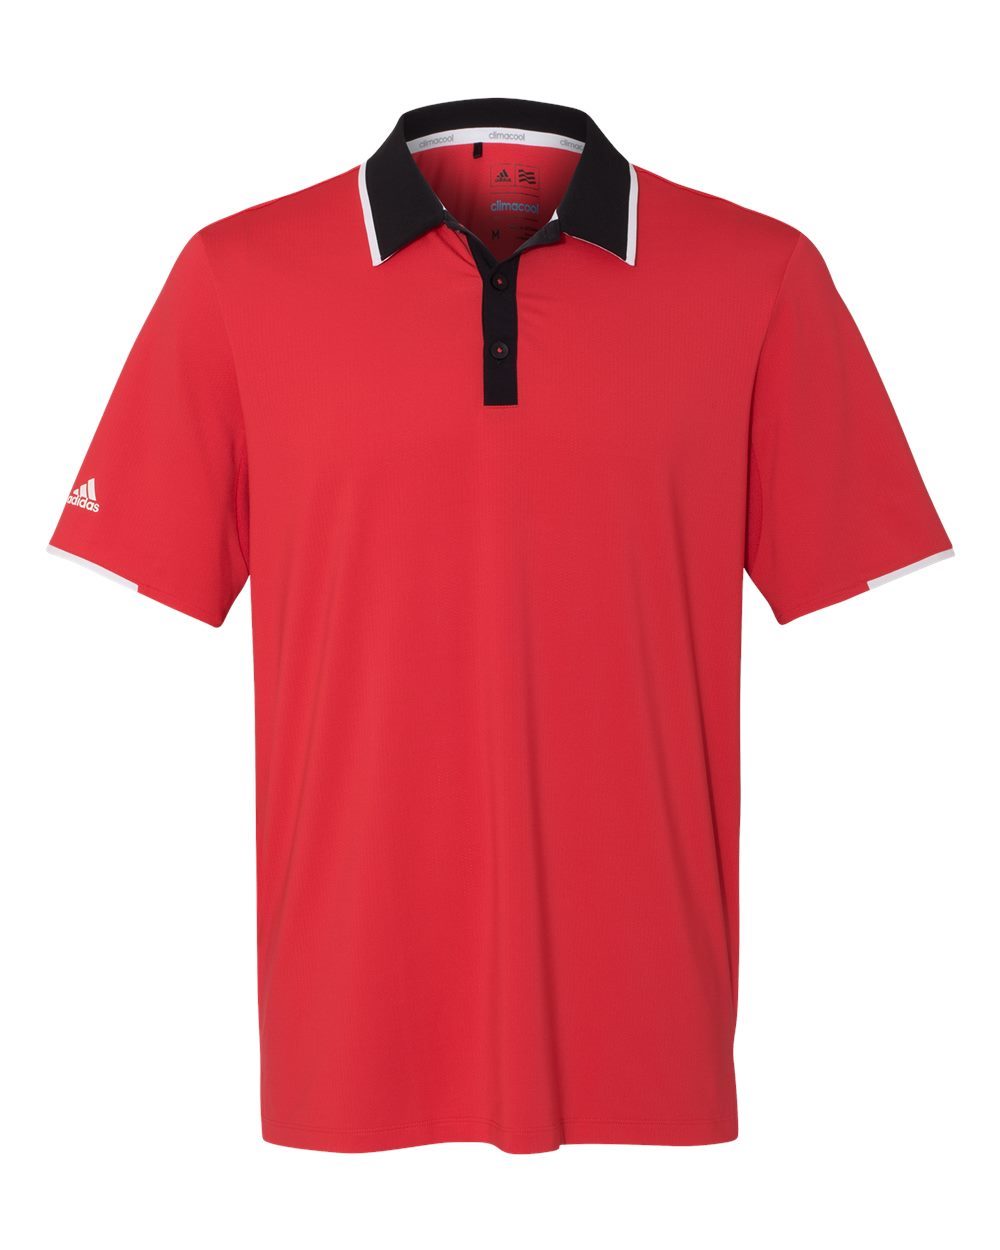 Adidas A166 - Performance Colorblocked Polo